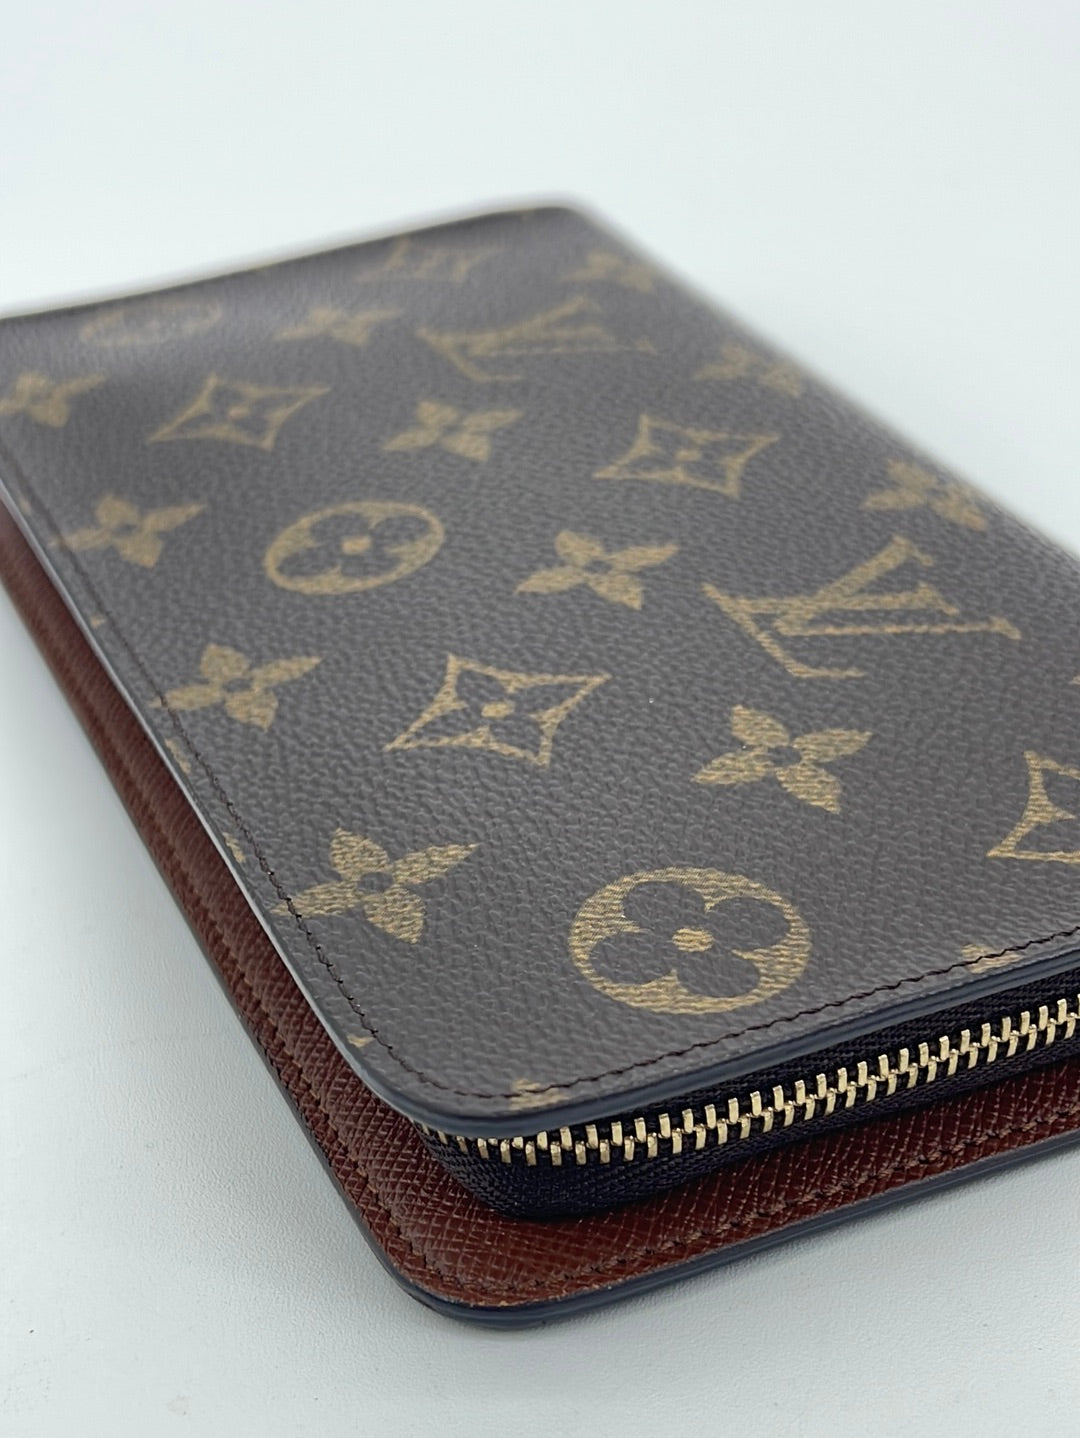 Louis Vuitton AS IS 2005 Suhali Goatskin Leather Compact Bifold Zip Wallet